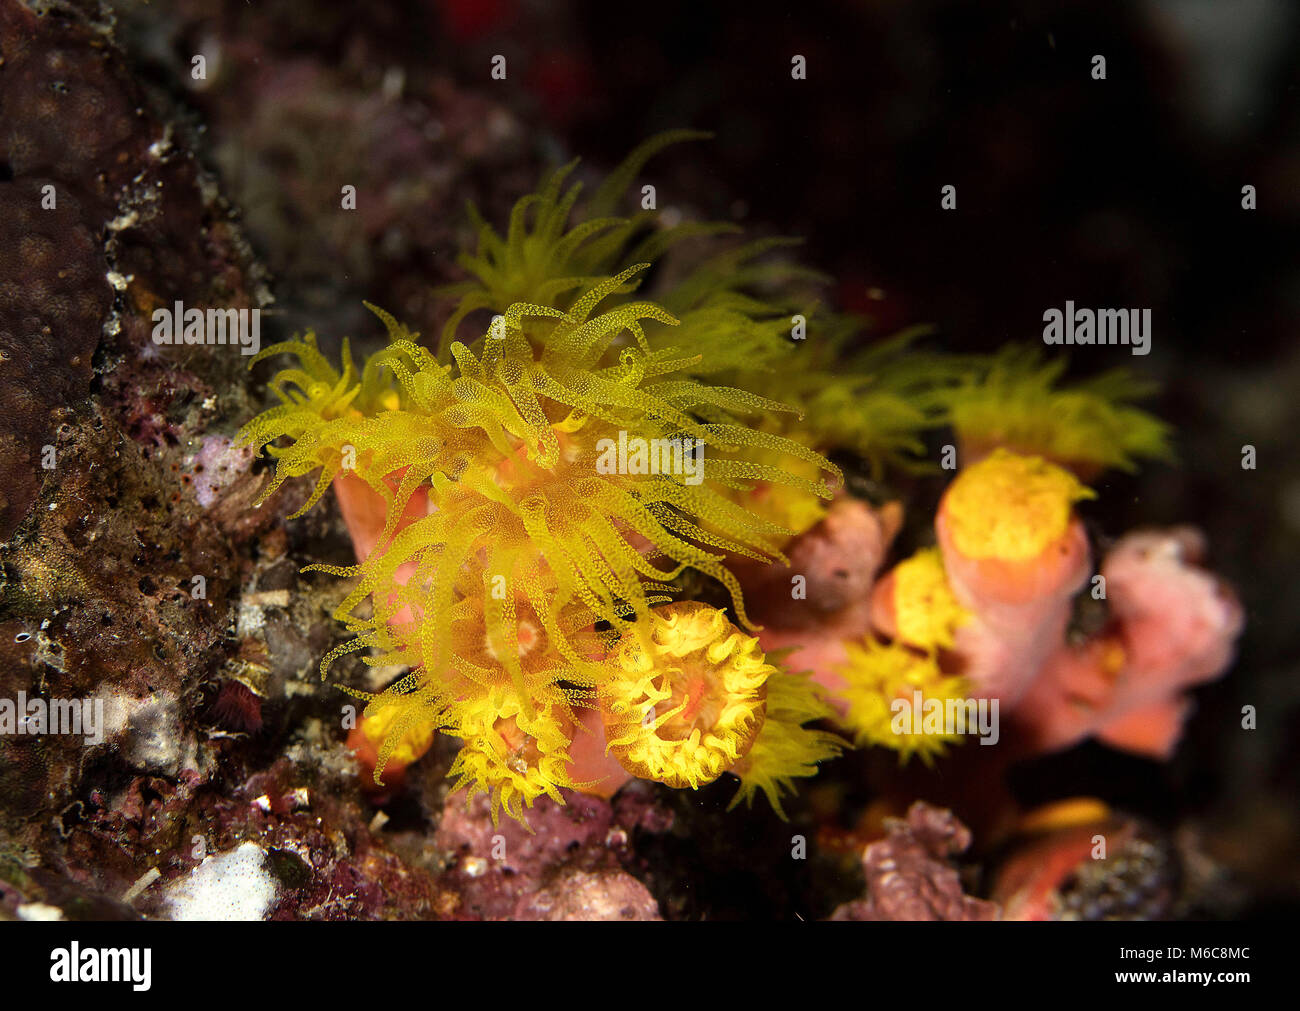 Soft coral Actiniaria. Picture was taken in Moalboal, Philippines Stock Photo